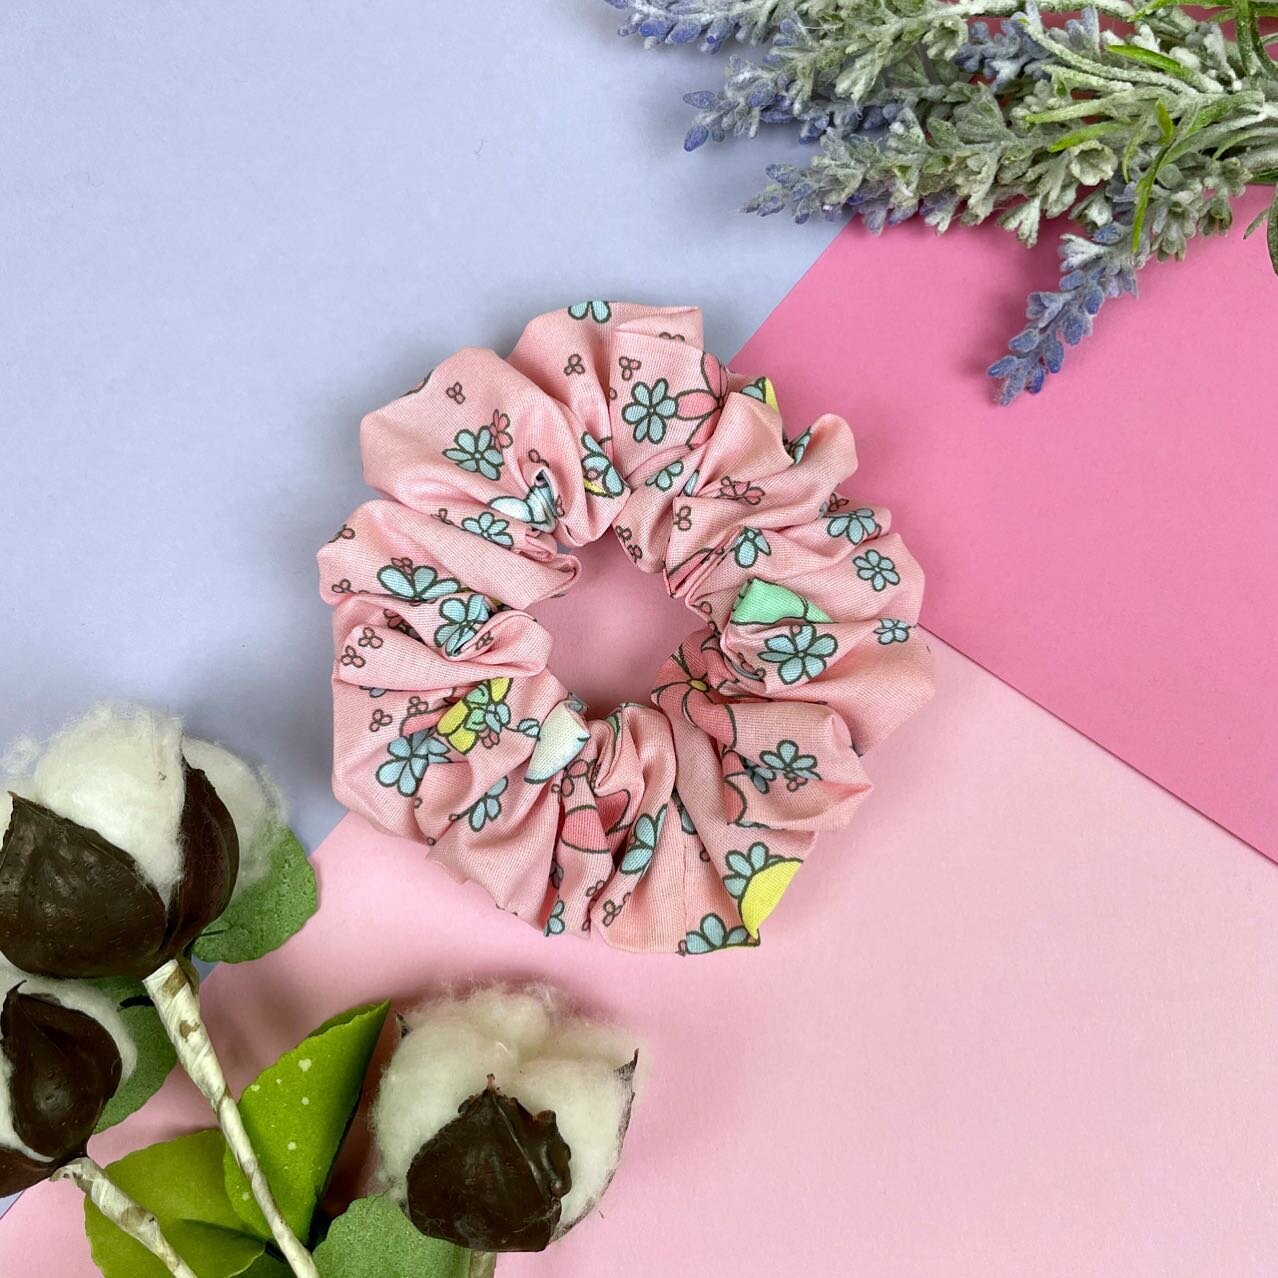 One of the precious moments scrunchies was made with a tiny bit of extra fabric so it was EXTRA FLUFFY! This one already sold but I have plenty more of the regular fluff amount ones left 💗💗💗
.
.
.
#sustainablesmallbusiness #ethicalsmallbusiness #s